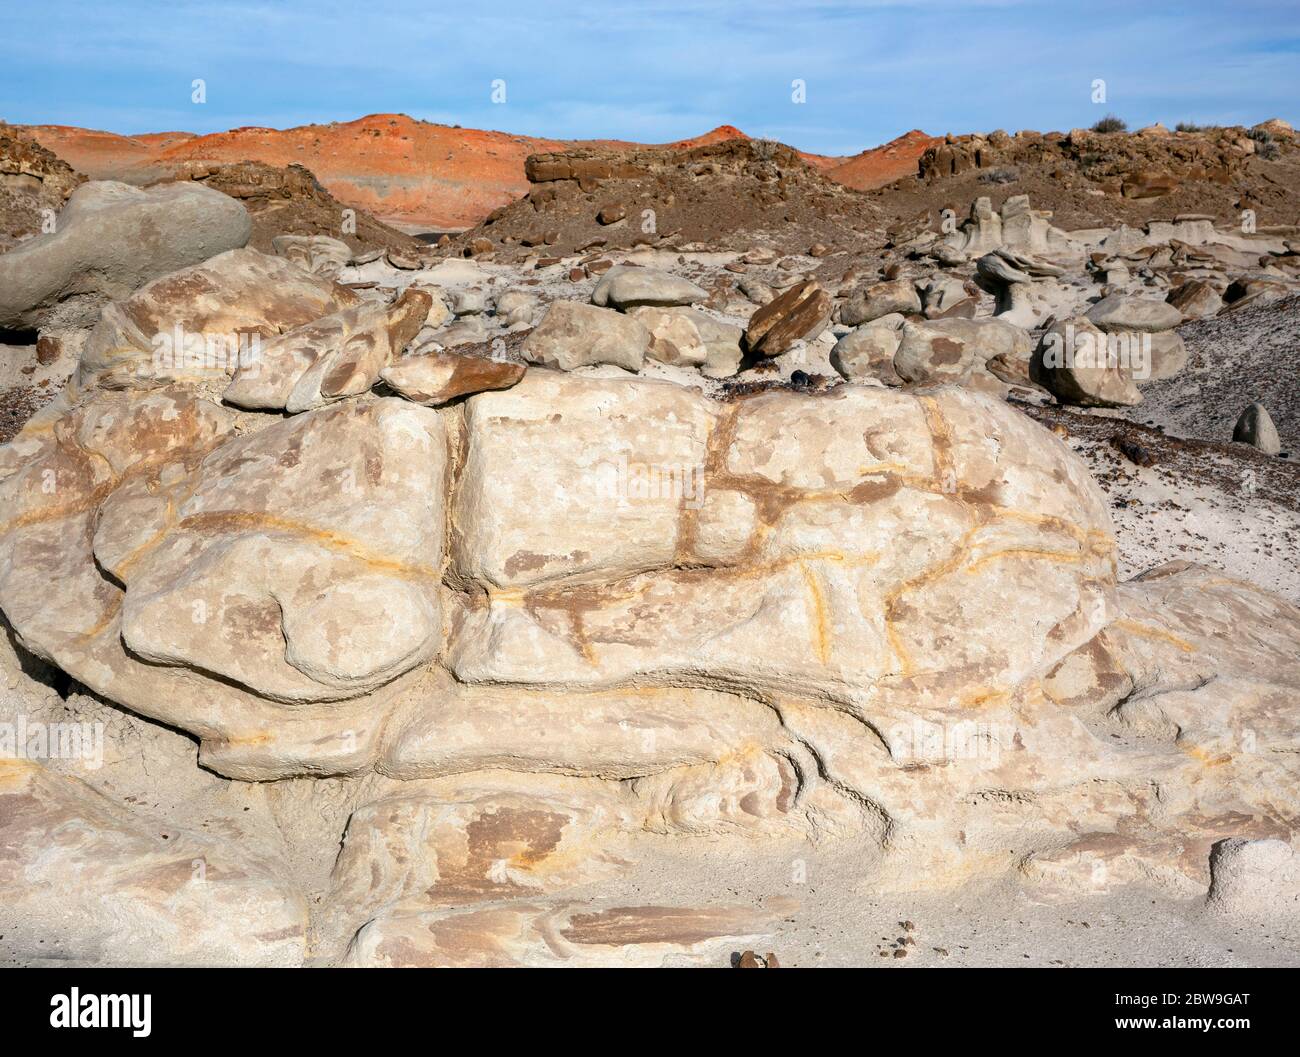 NM00288-00...NEW MEXICO - Soil and rocks of many colors brighten the Bisti Wilderness area. Stock Photo